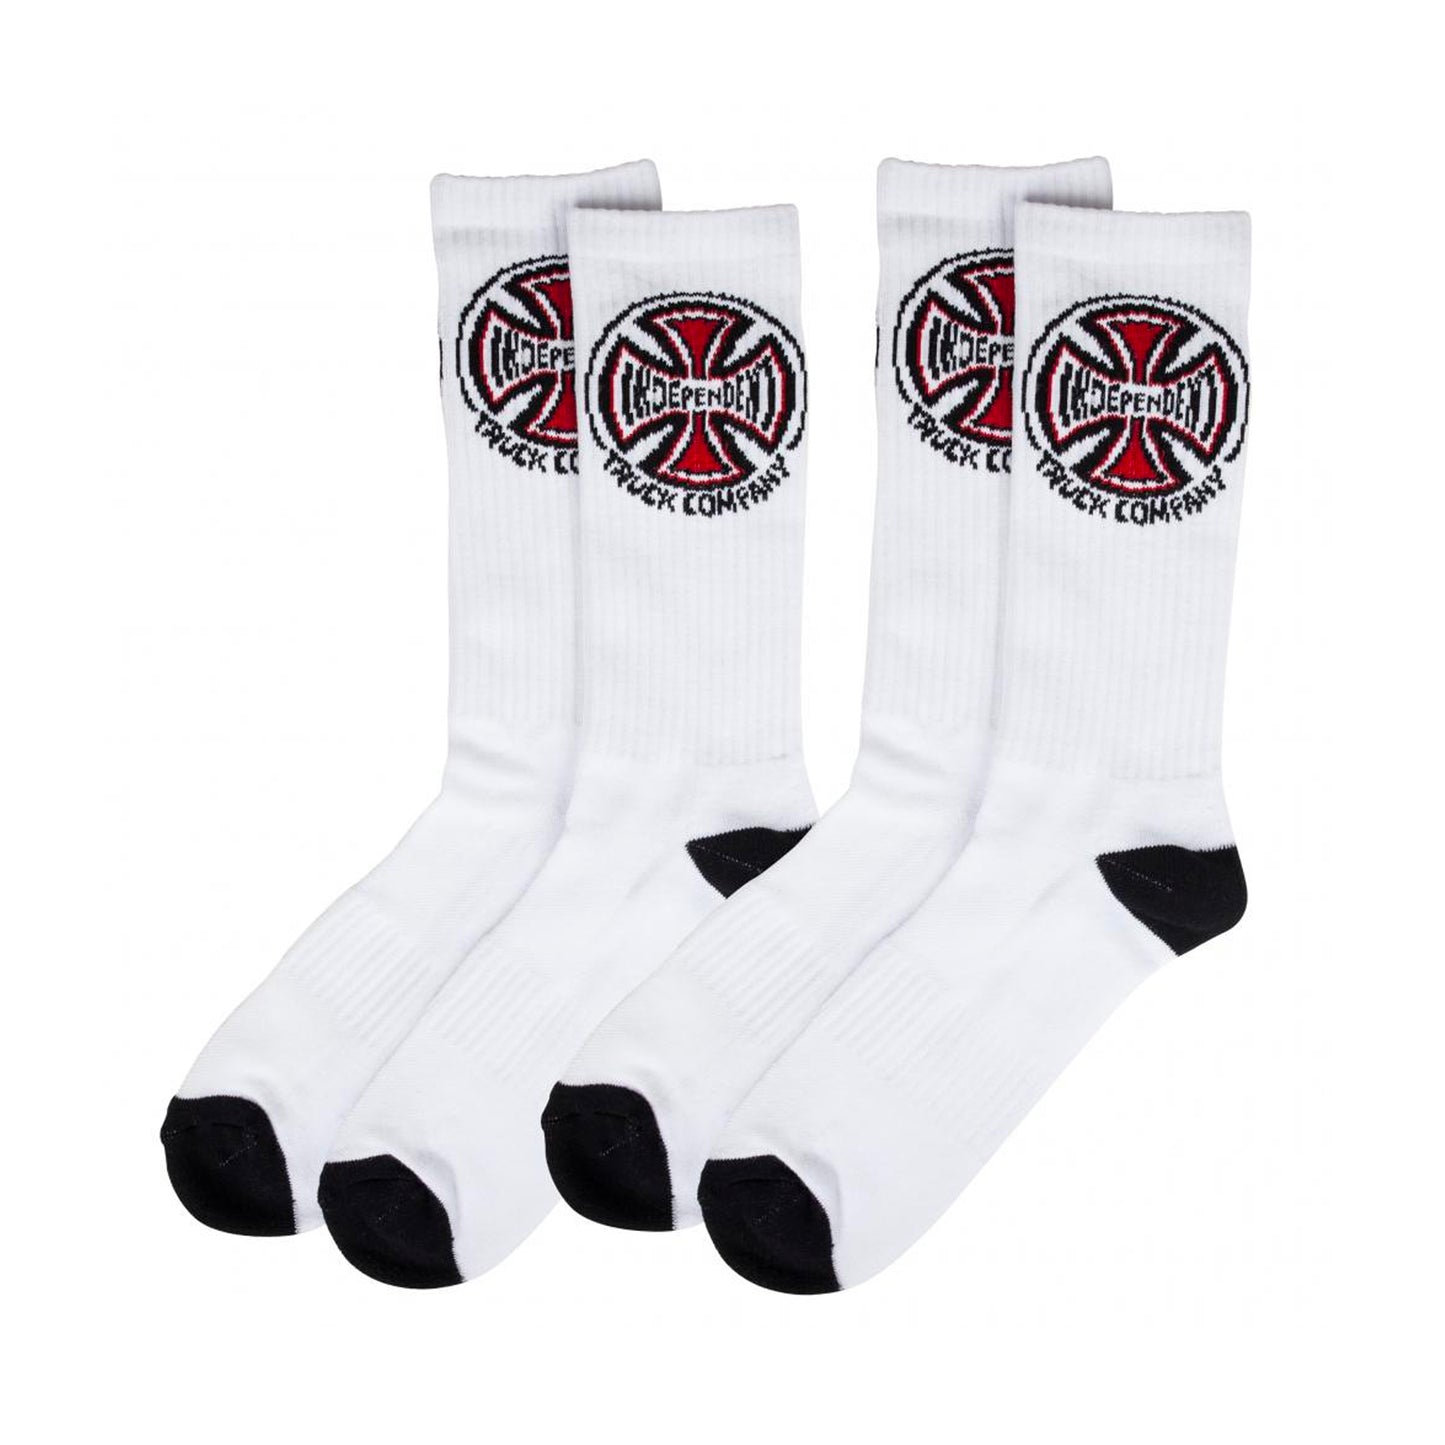 Independent Truck Co. Socks White (x2 Pairs) - Prime Delux Store